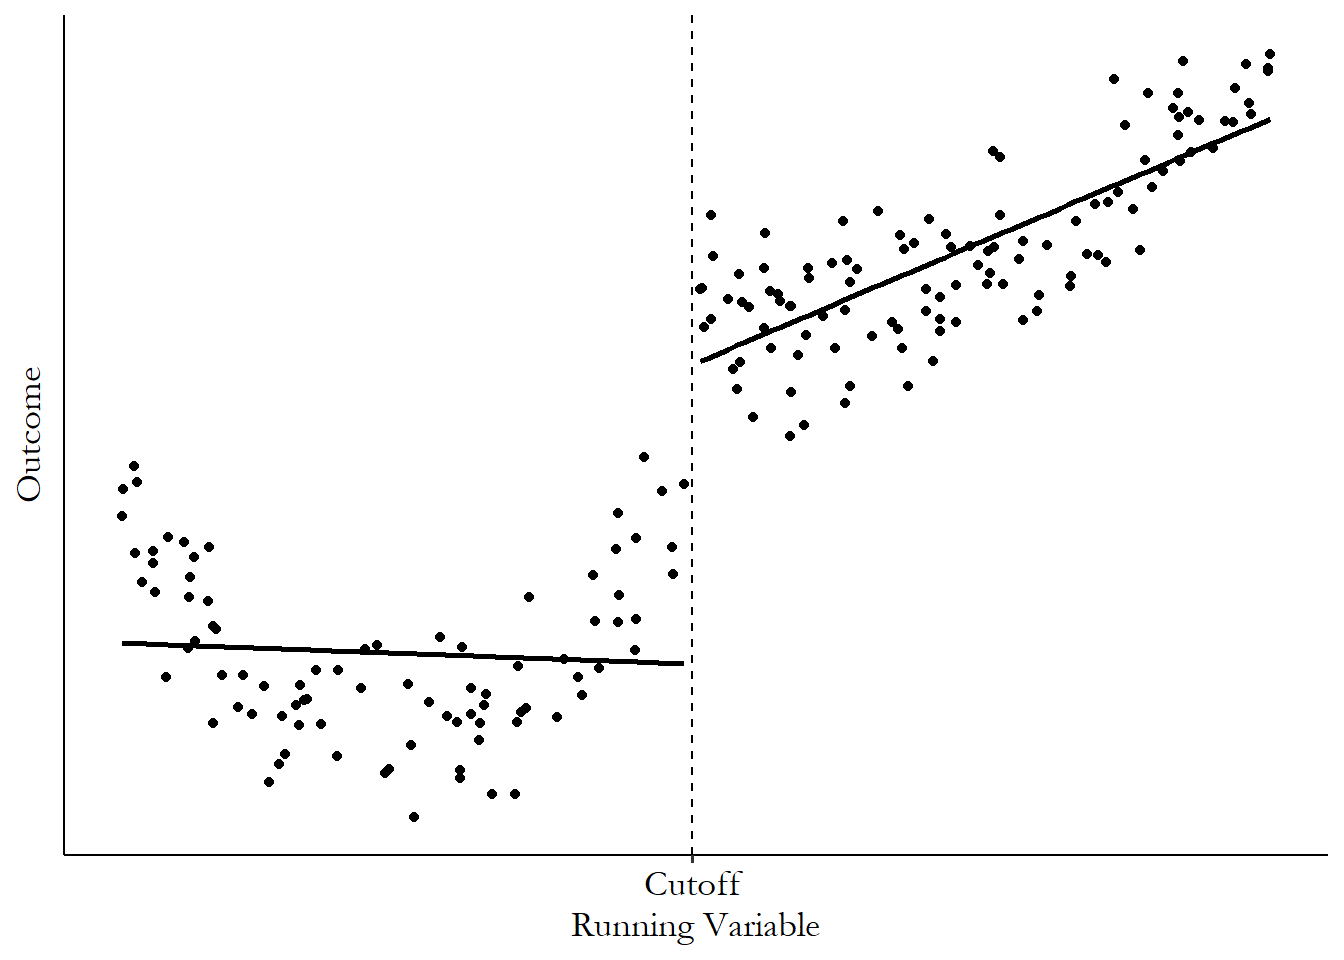 Scatterplot of data with a cutoff on the x-axis, with a clear jump at the cutoff. The data to the left follows a parabola, and a slight upward curve on the right, but both sides are fit with as straight line. The fit on the left is bad.